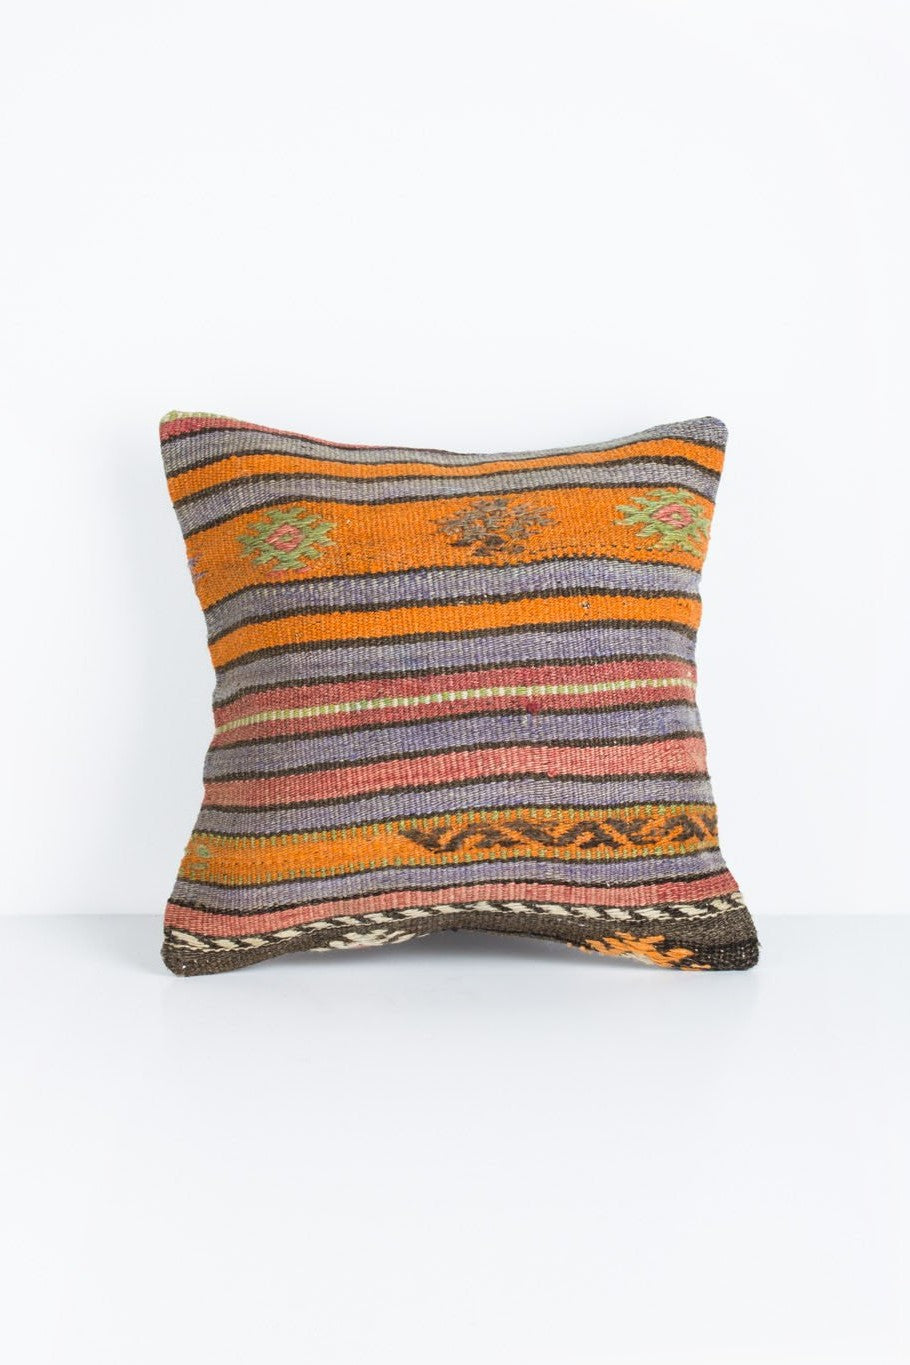 Kilim pillow; Decorative Turkish pillow; Wool pillow cushion; Bohemian fashion; Authentic hand woven pillow made of old Turkish rug; Killim cushion; Handmade pillow of vintage kilims; Vintage Anatolian kilim pillow; Wool on the front, cotton on the back pillow; Convenient zipper closure on pillow; Indoor Square cushion case; Fair-trade pillow; Ethically soured; Unique handmade; Hand-knotted